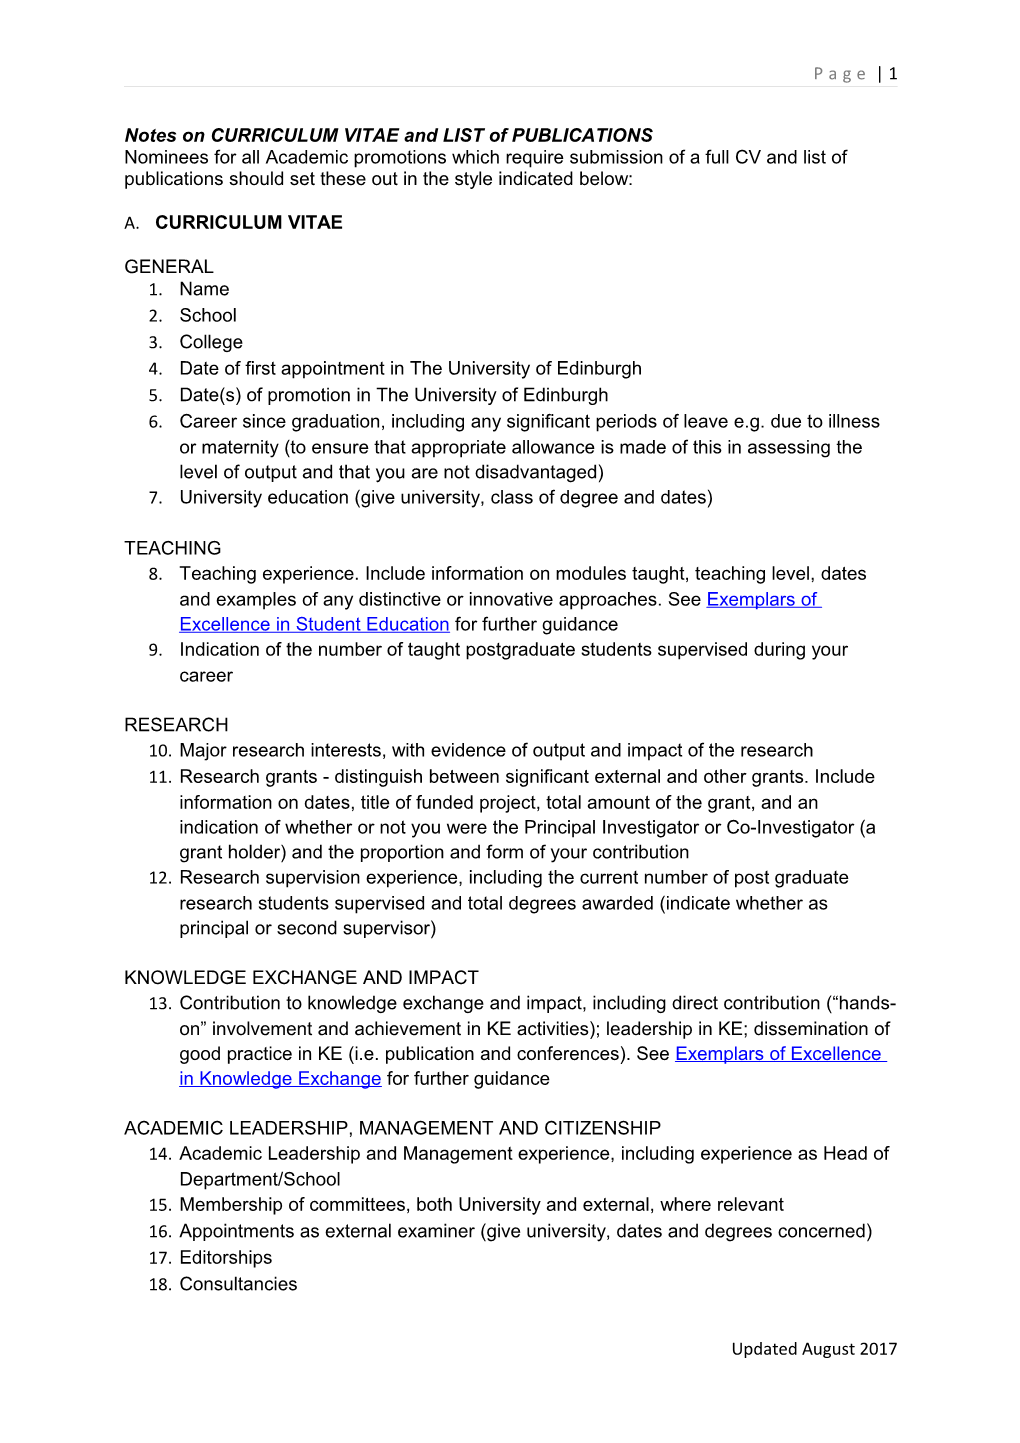 Notes on CURRICULUM VITAE and LIST of PUBLICATIONS